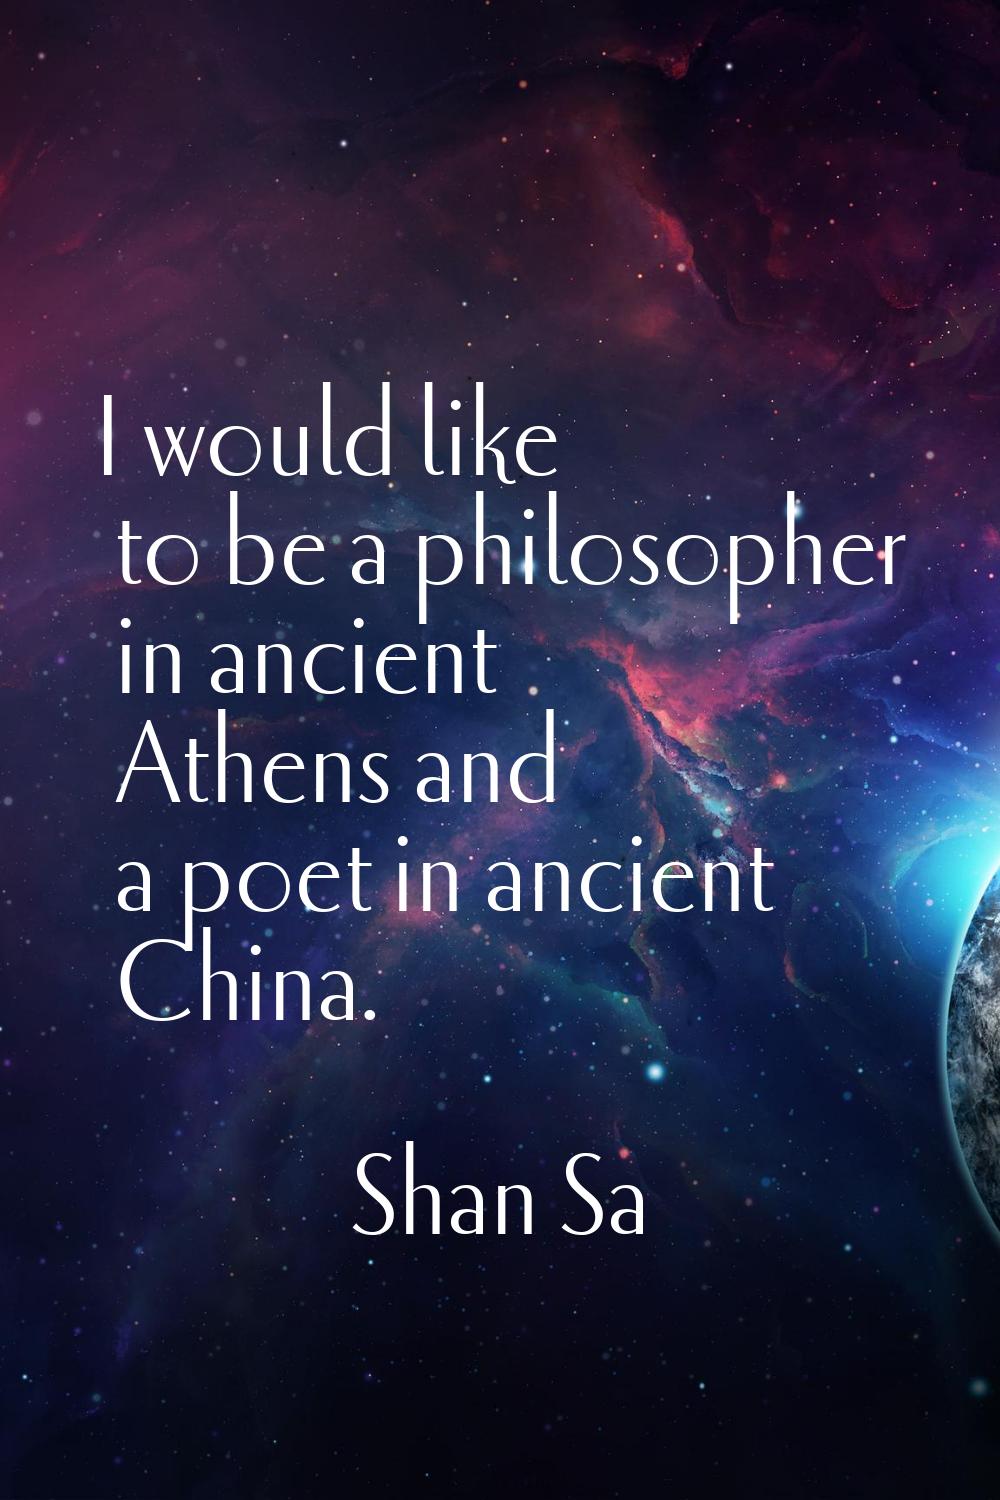 I would like to be a philosopher in ancient Athens and a poet in ancient China.